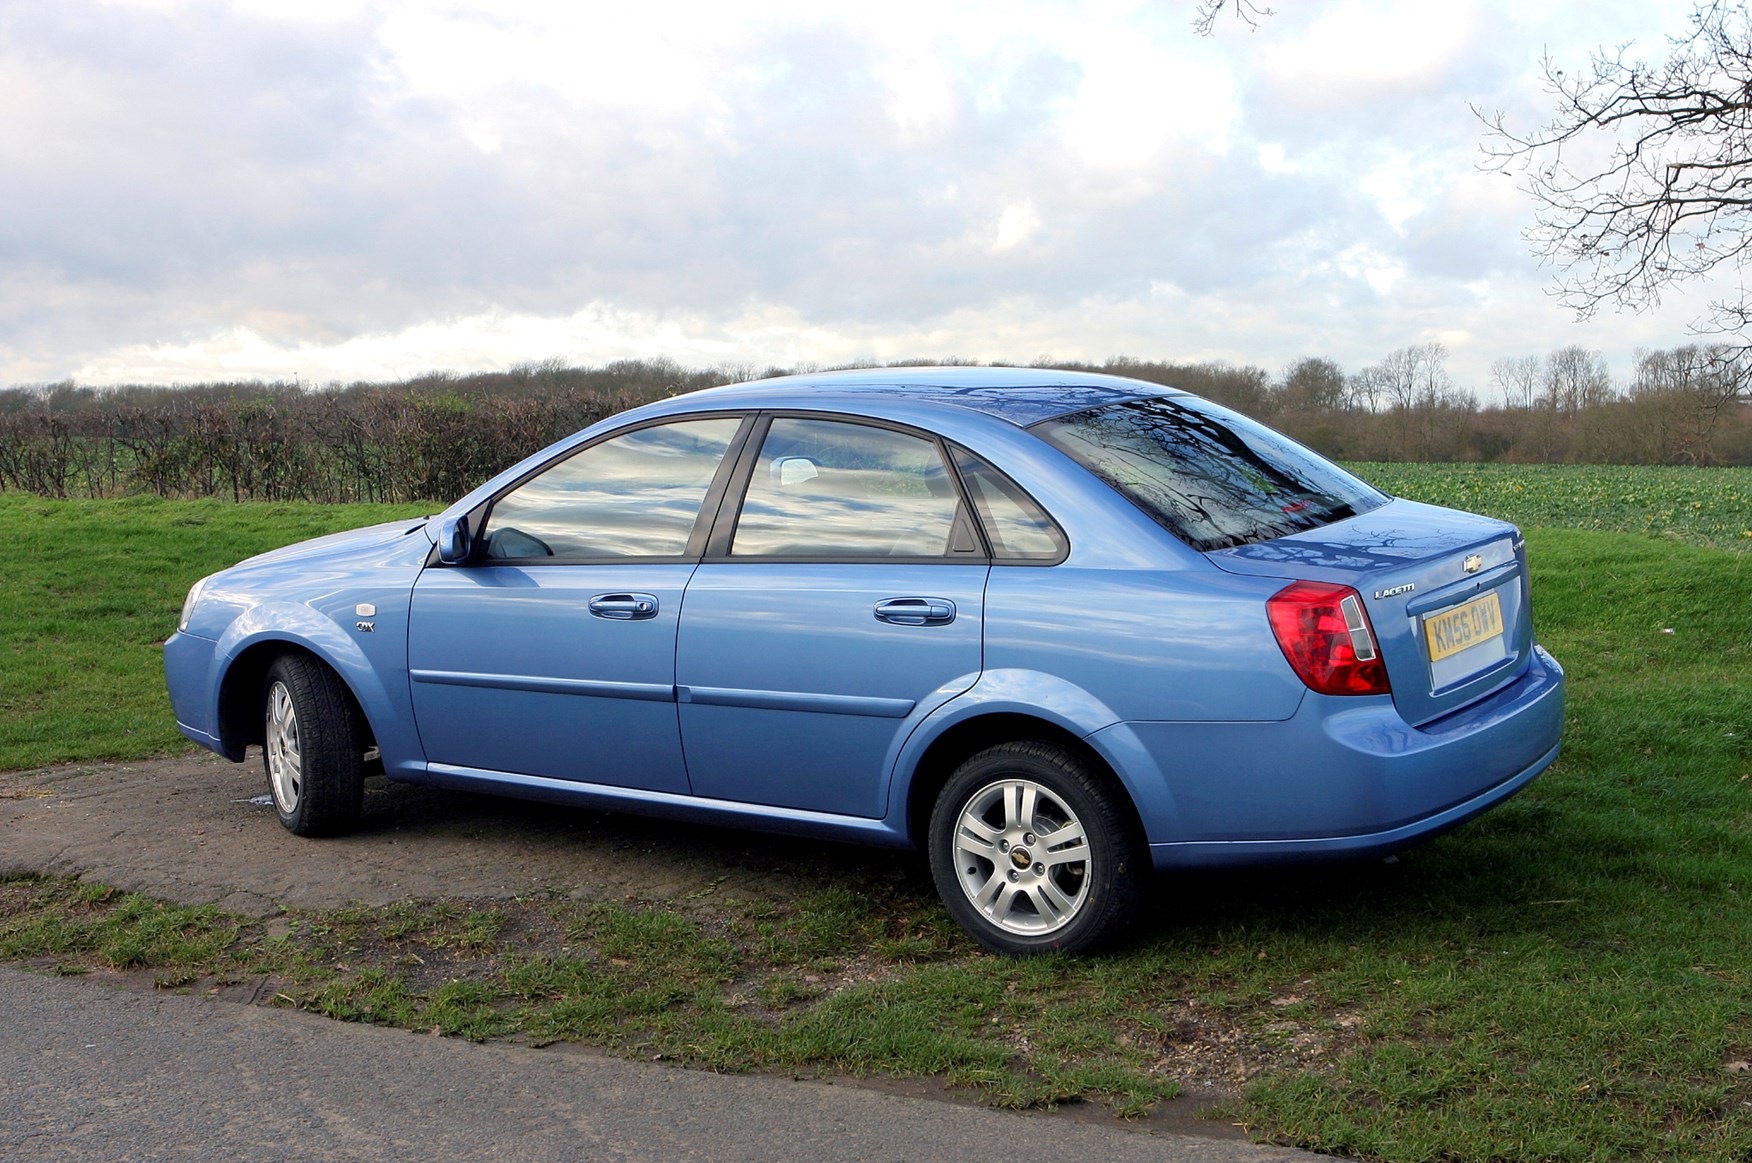 Used Chevrolet Lacetti Saloon (2005 2006) Review Parkers